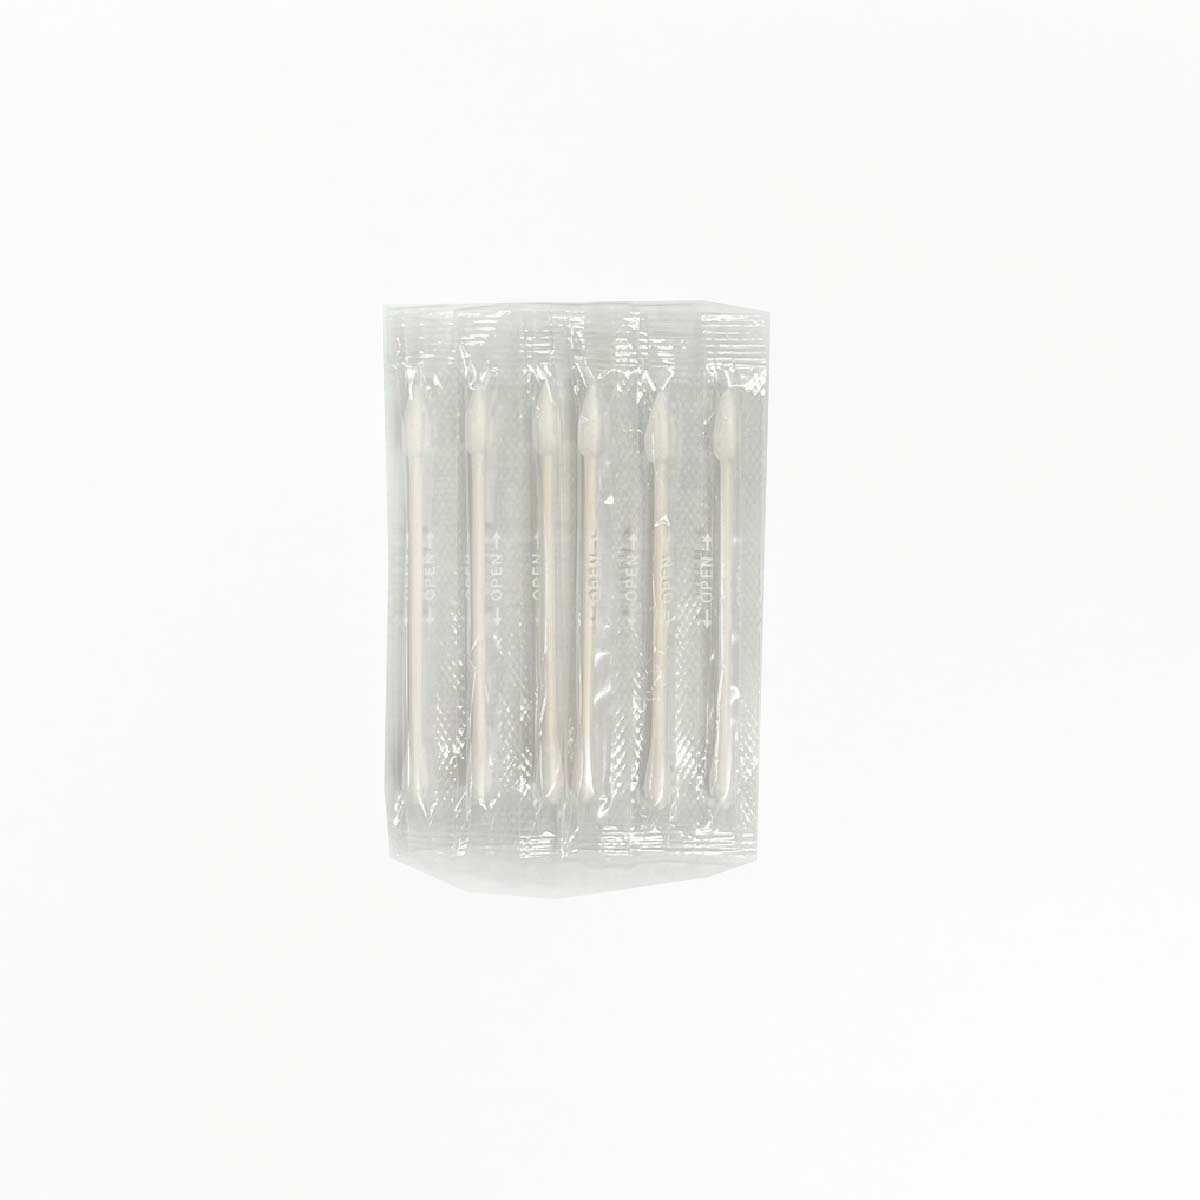 First Aid Cotton Tip Applicators, 6